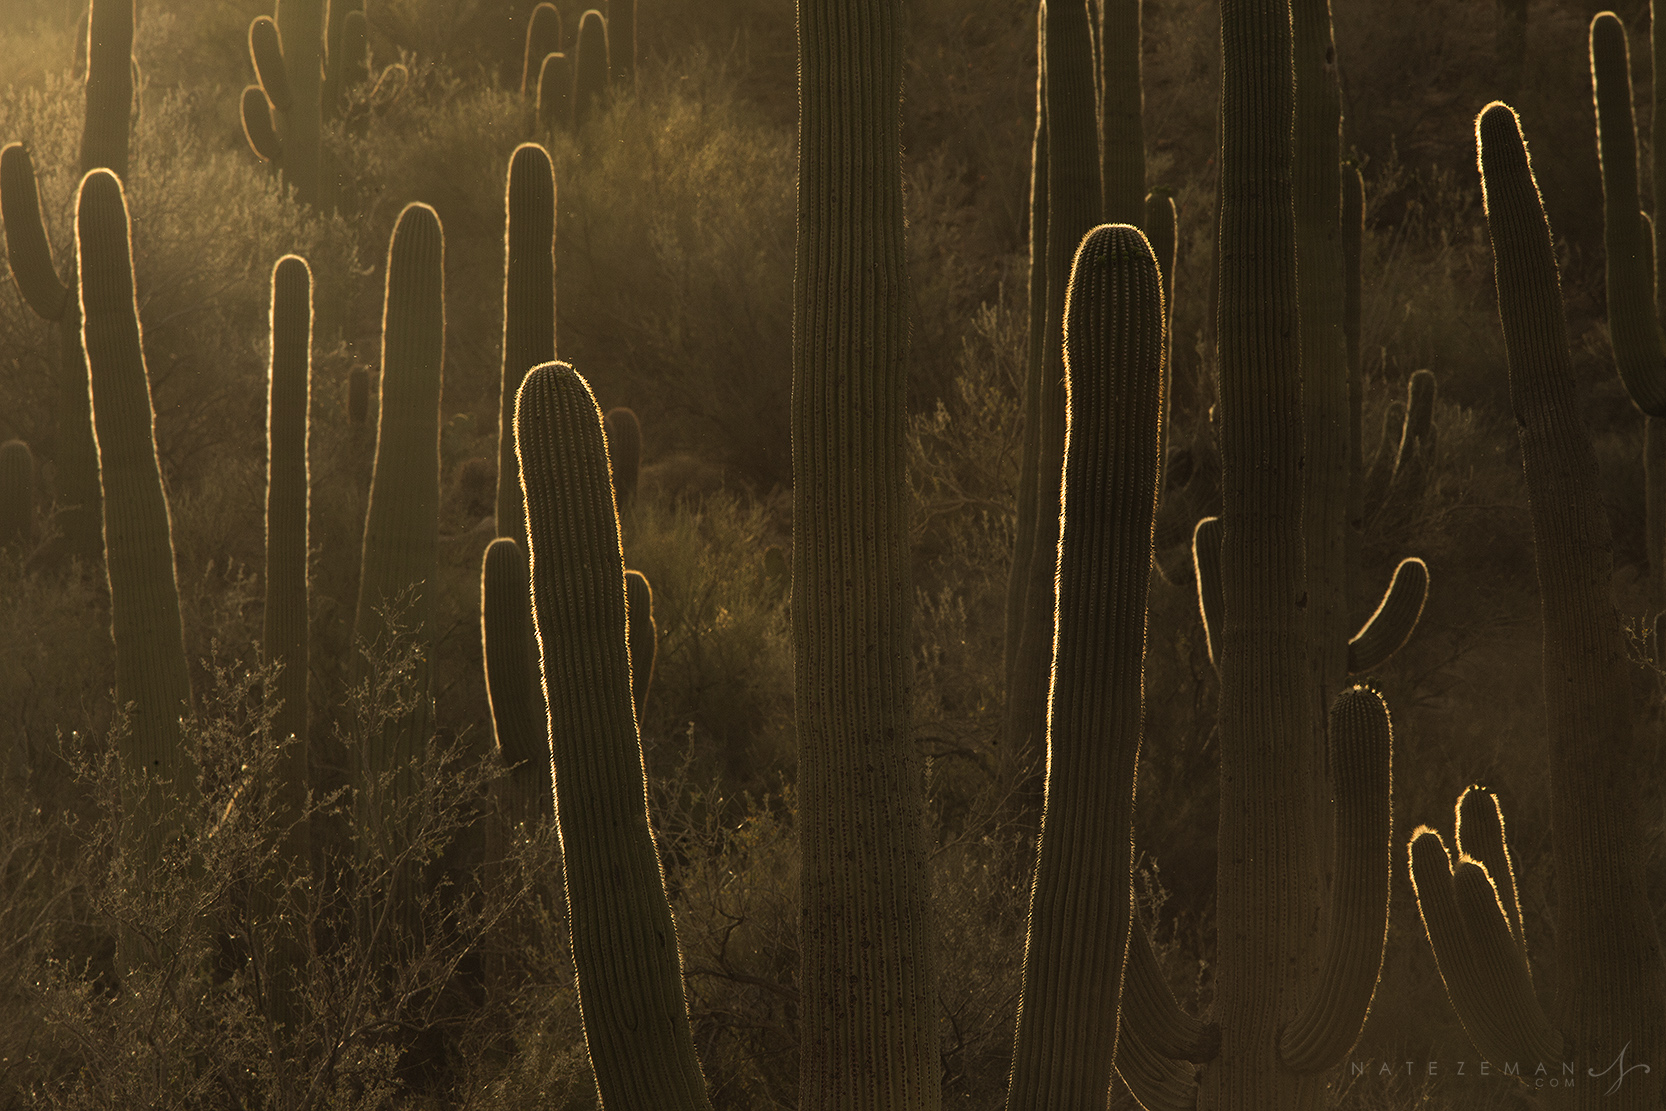 The fading summer sun streaks across&nbsp;a stand of saguaro cacti,&nbsp;silhouetting them in warm evening&nbsp;light. Even though...